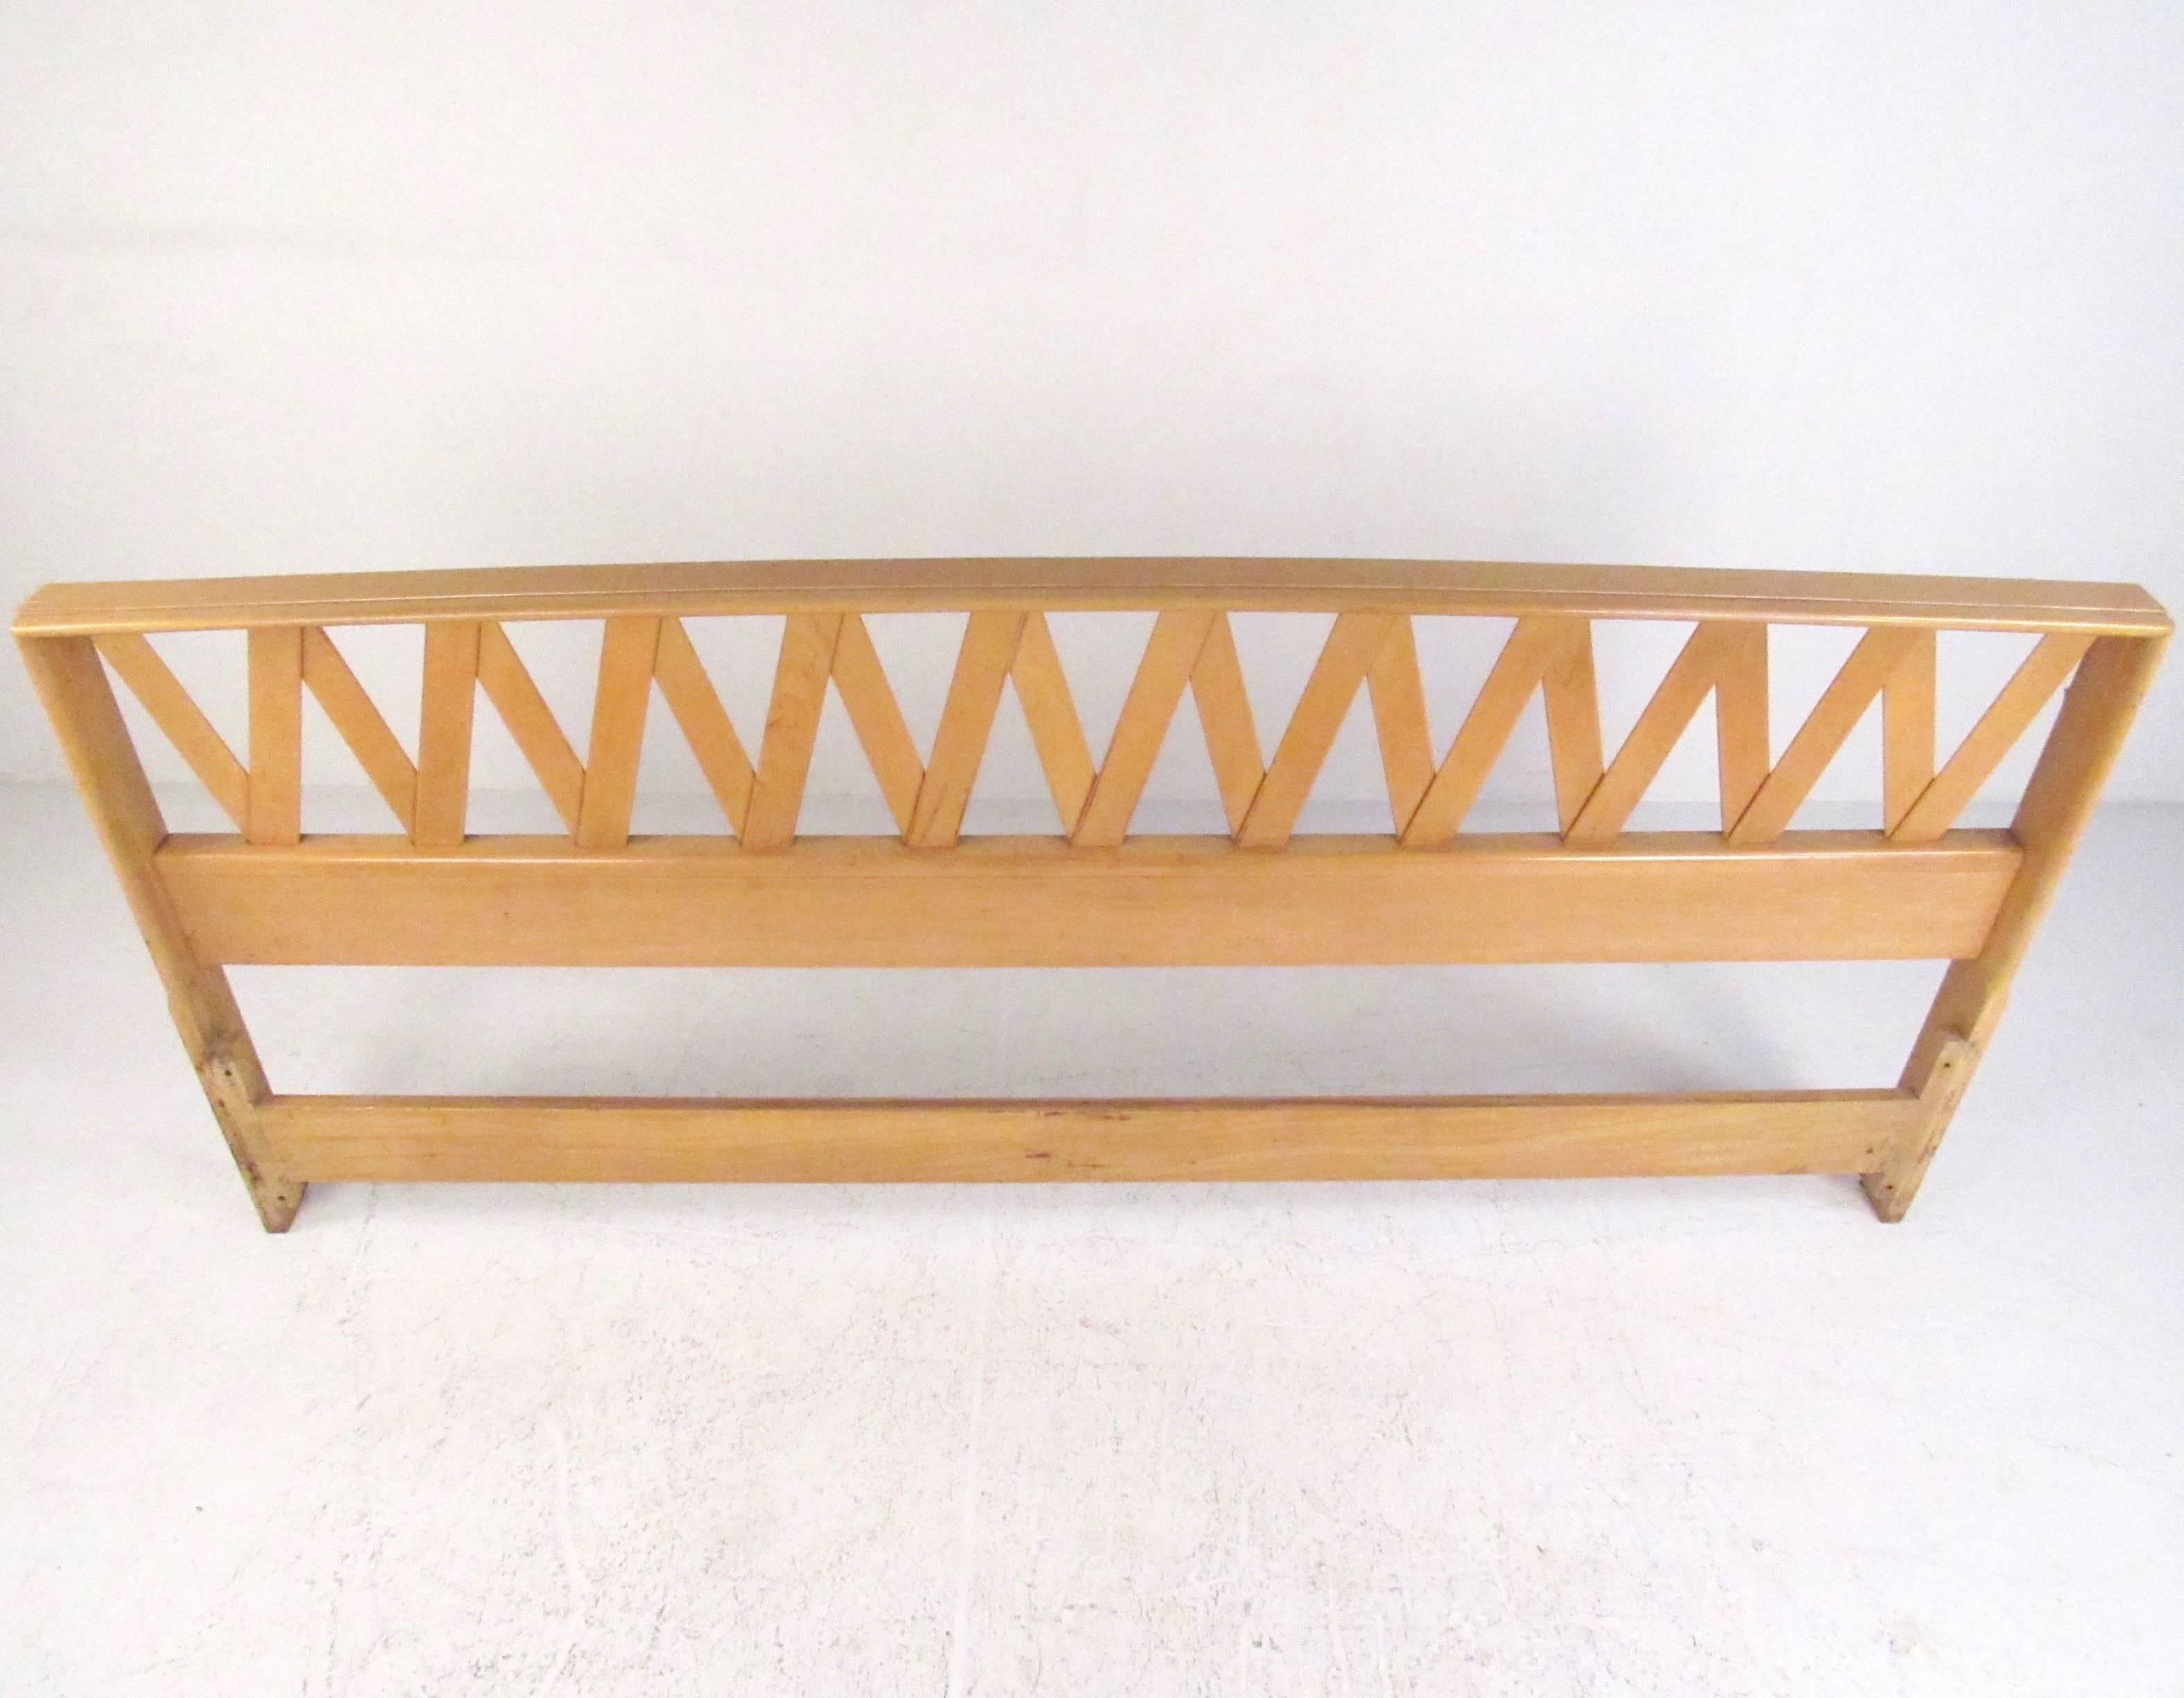 This vintage king-size headboard features the stylish Mid-Century design of Paul Frankl for Johnson furniture. The sculptural design adds unique modern appeal to any bedroom. Please confirm item location (NY or NJ).